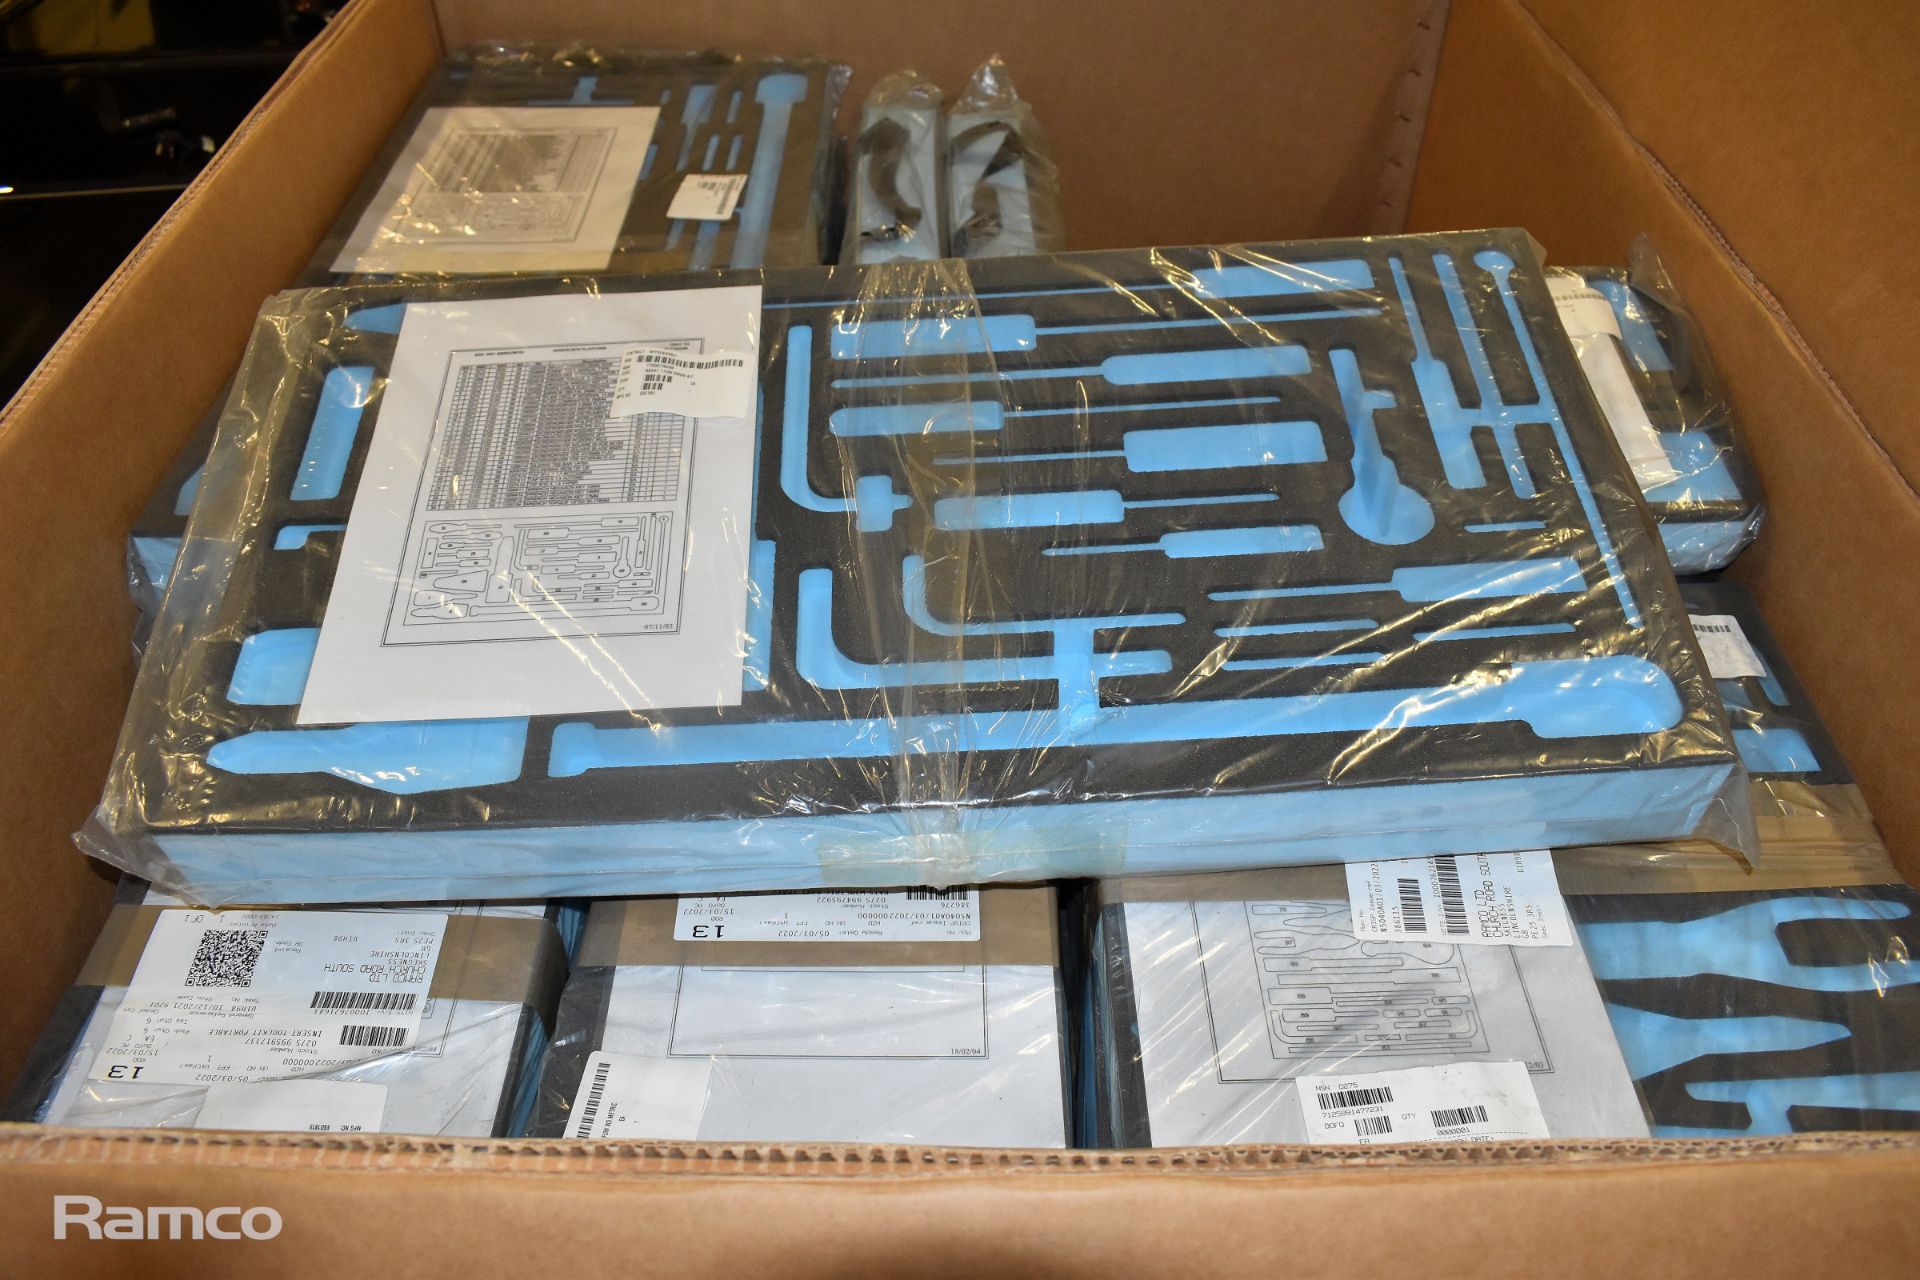 Toolbox foam inserts - 4 pallet sized boxes - Image 3 of 9